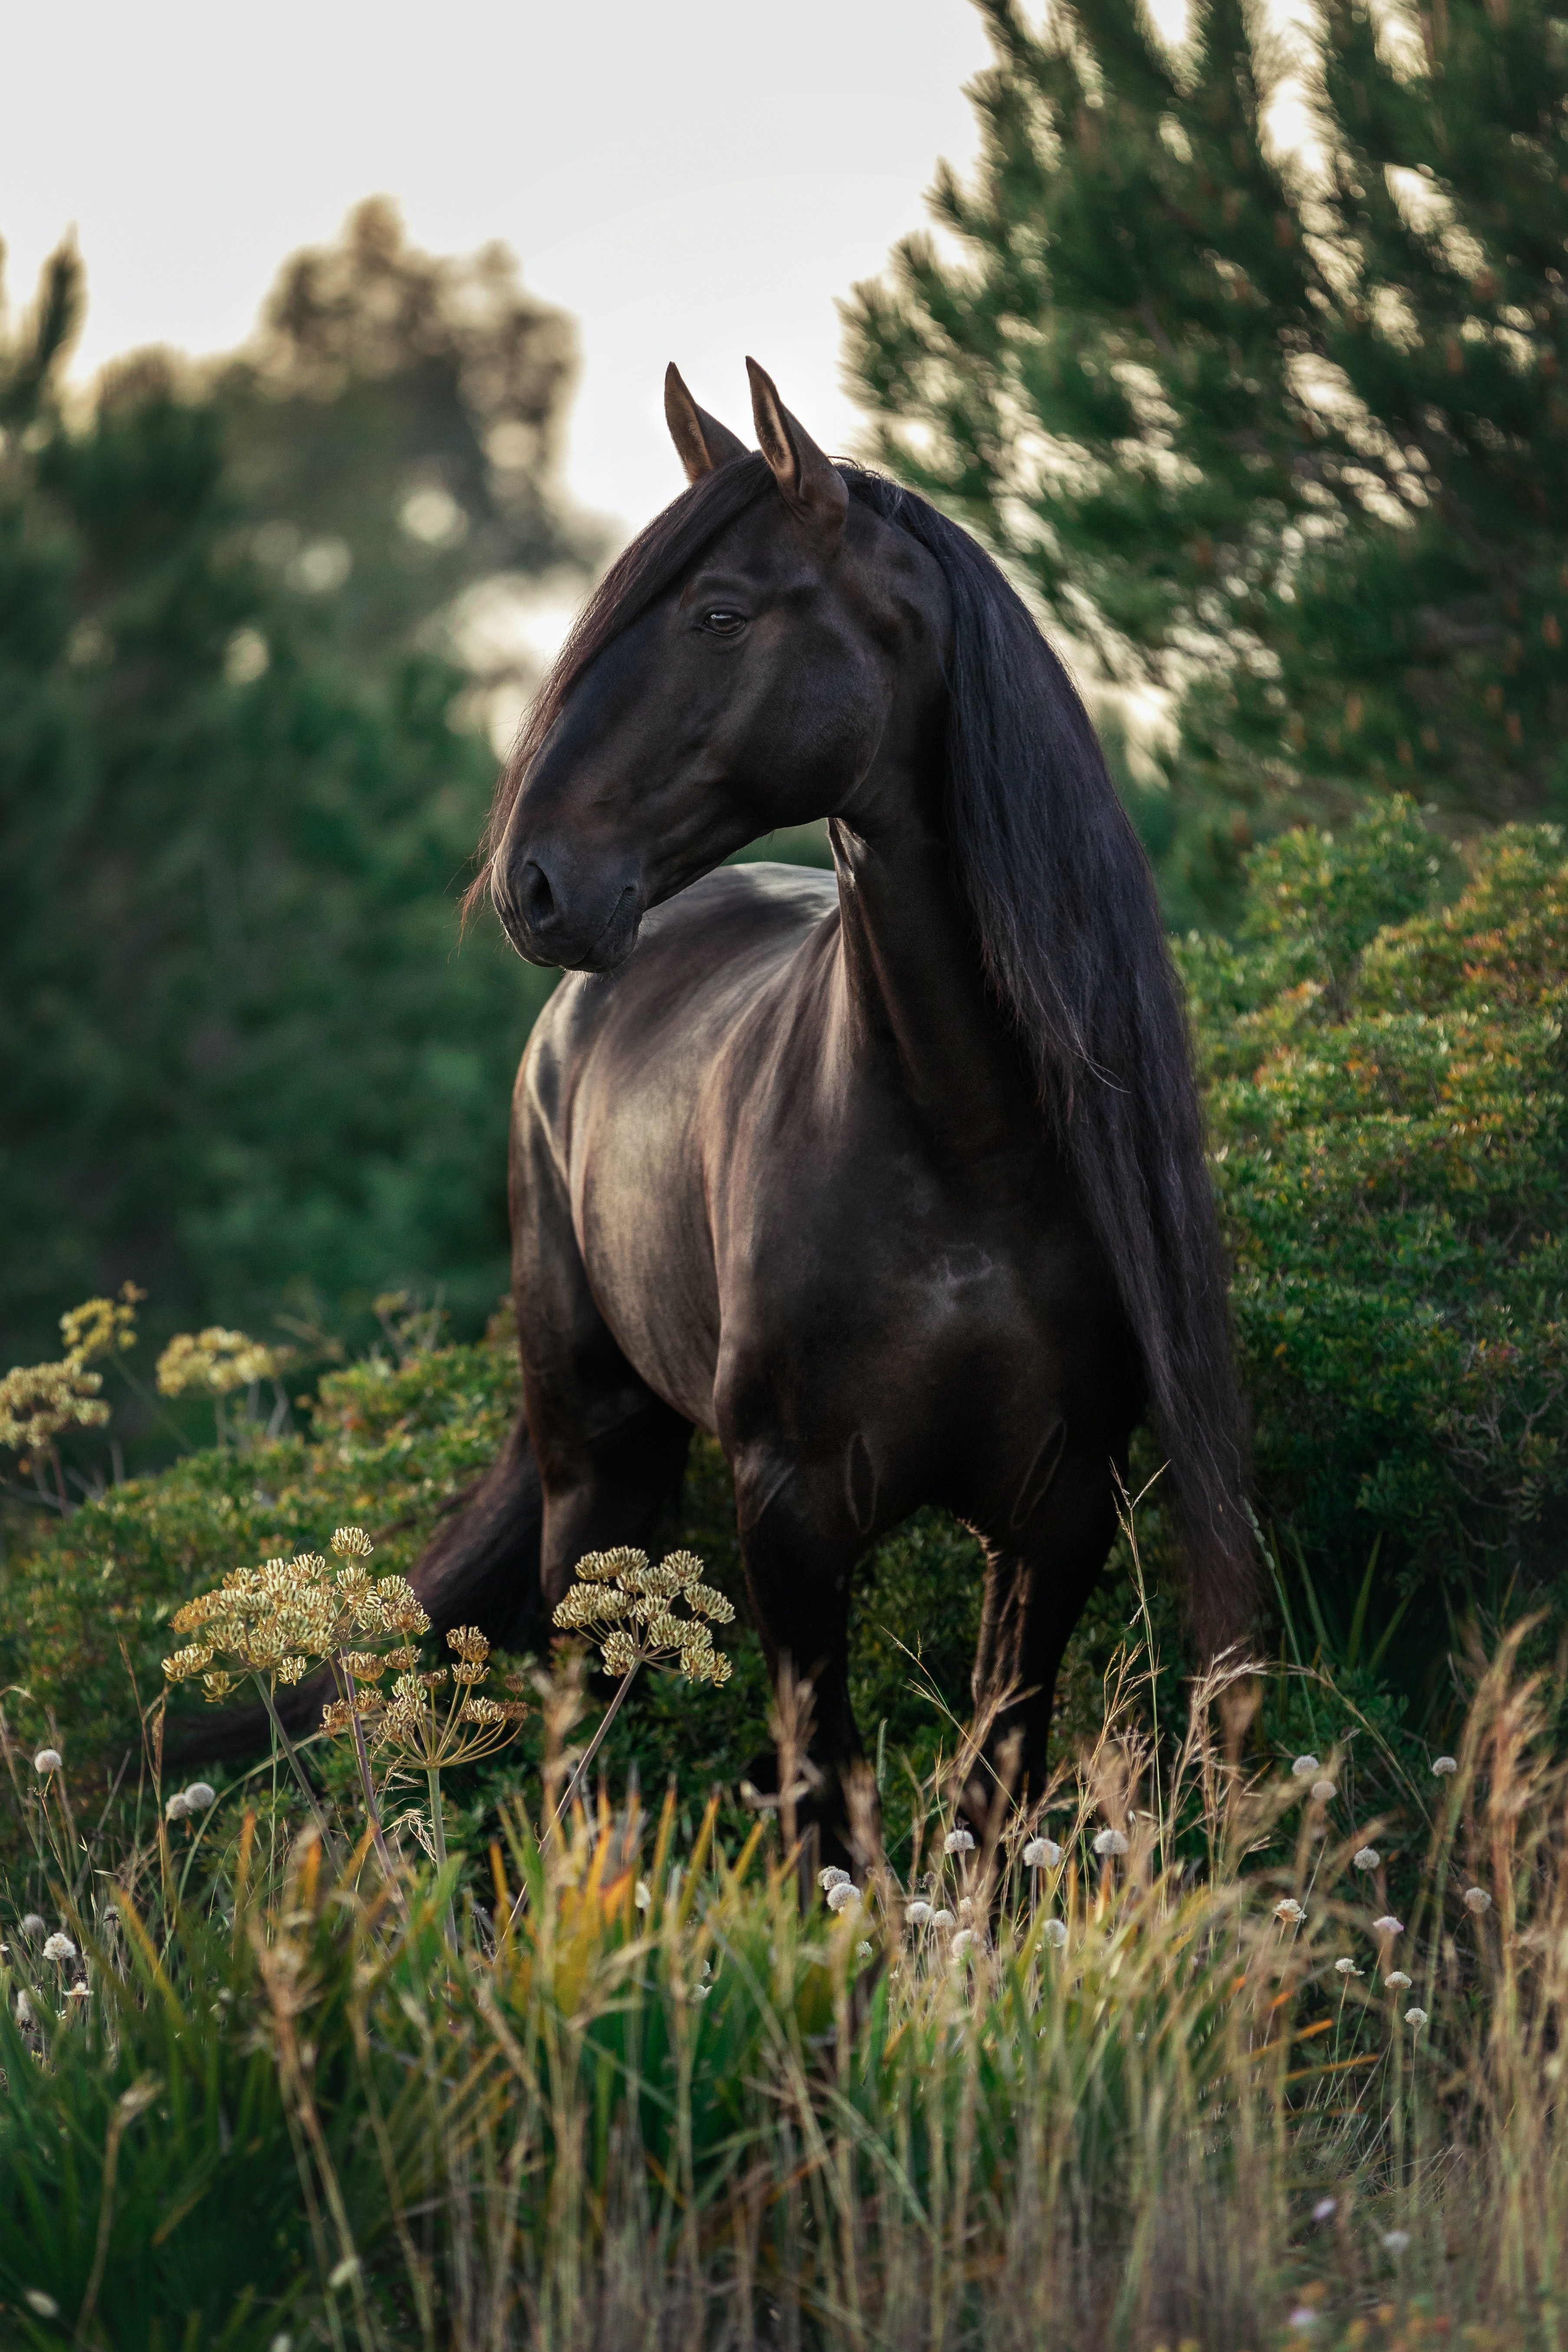 Black horse photos download the best free black horse stock photos hd images